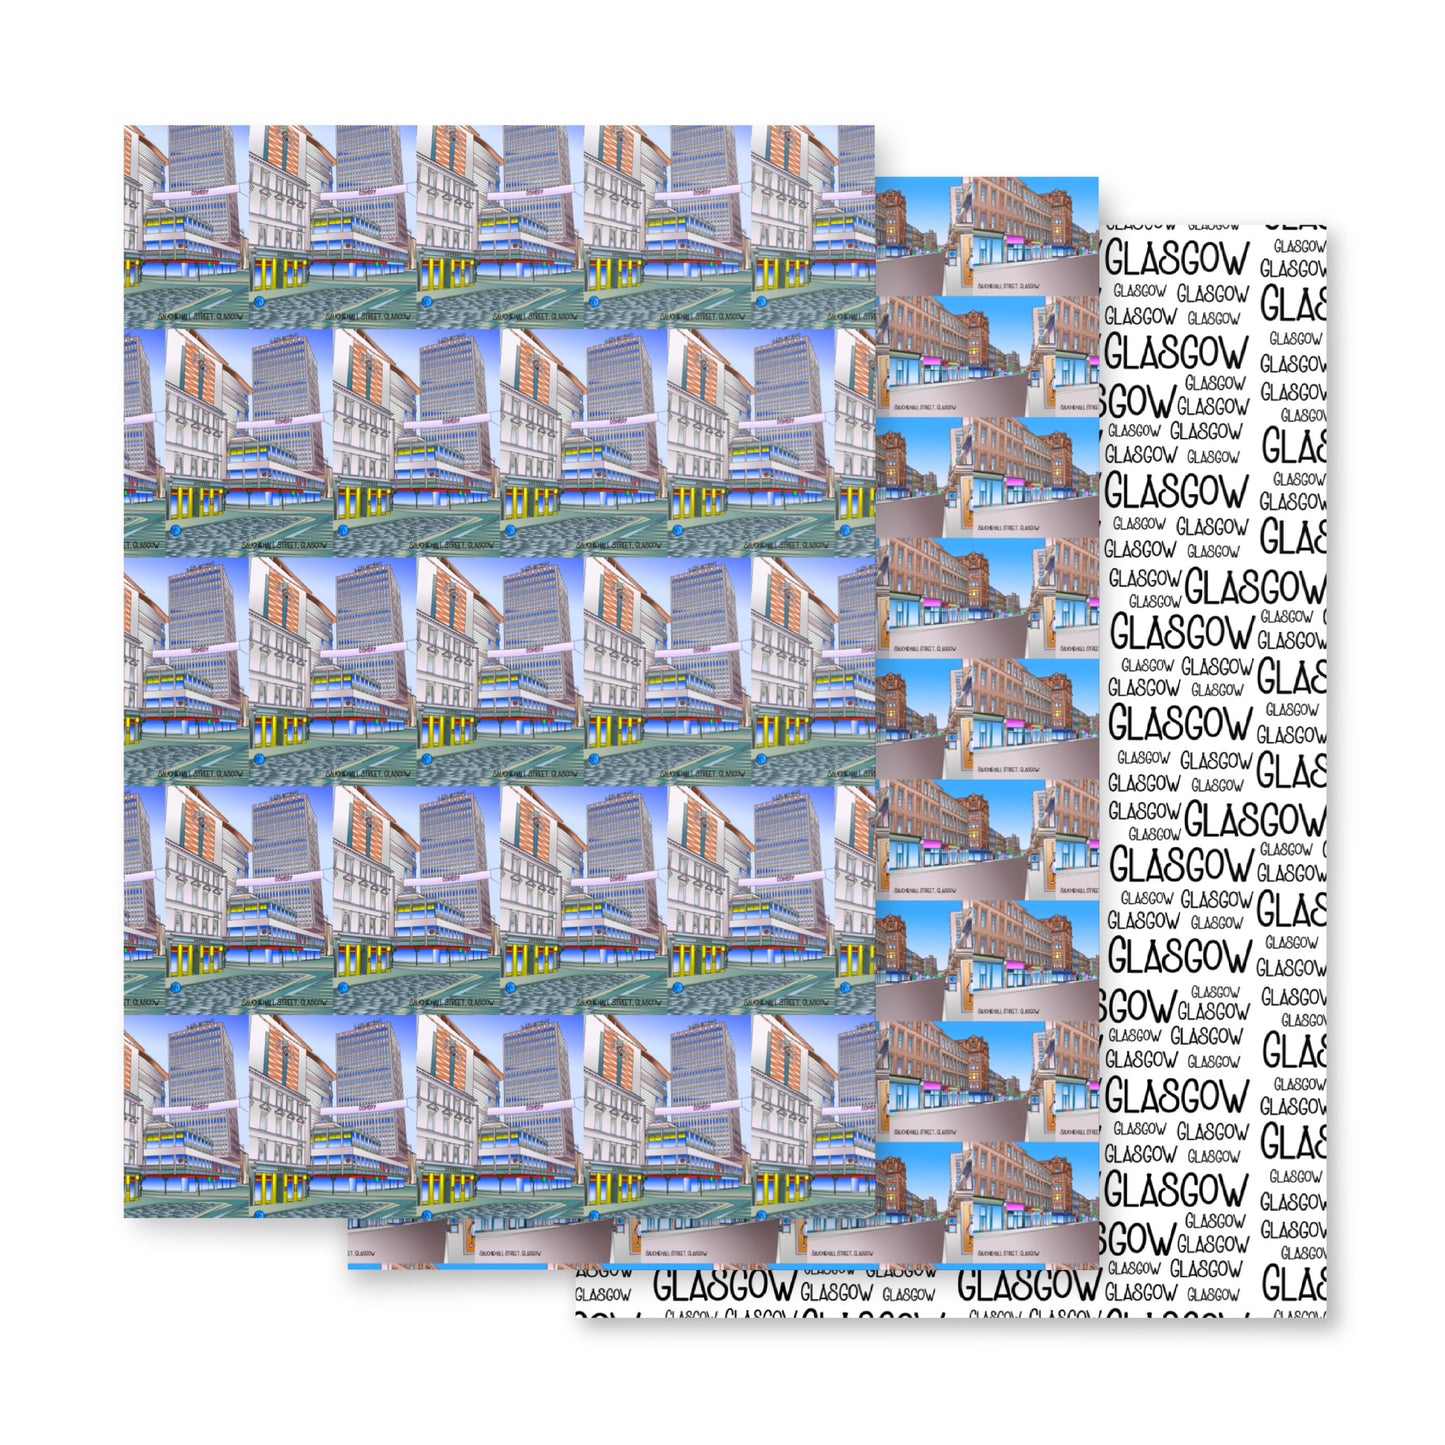 Sauchiehall Street Glasgow Wrapping paper sheets x 3